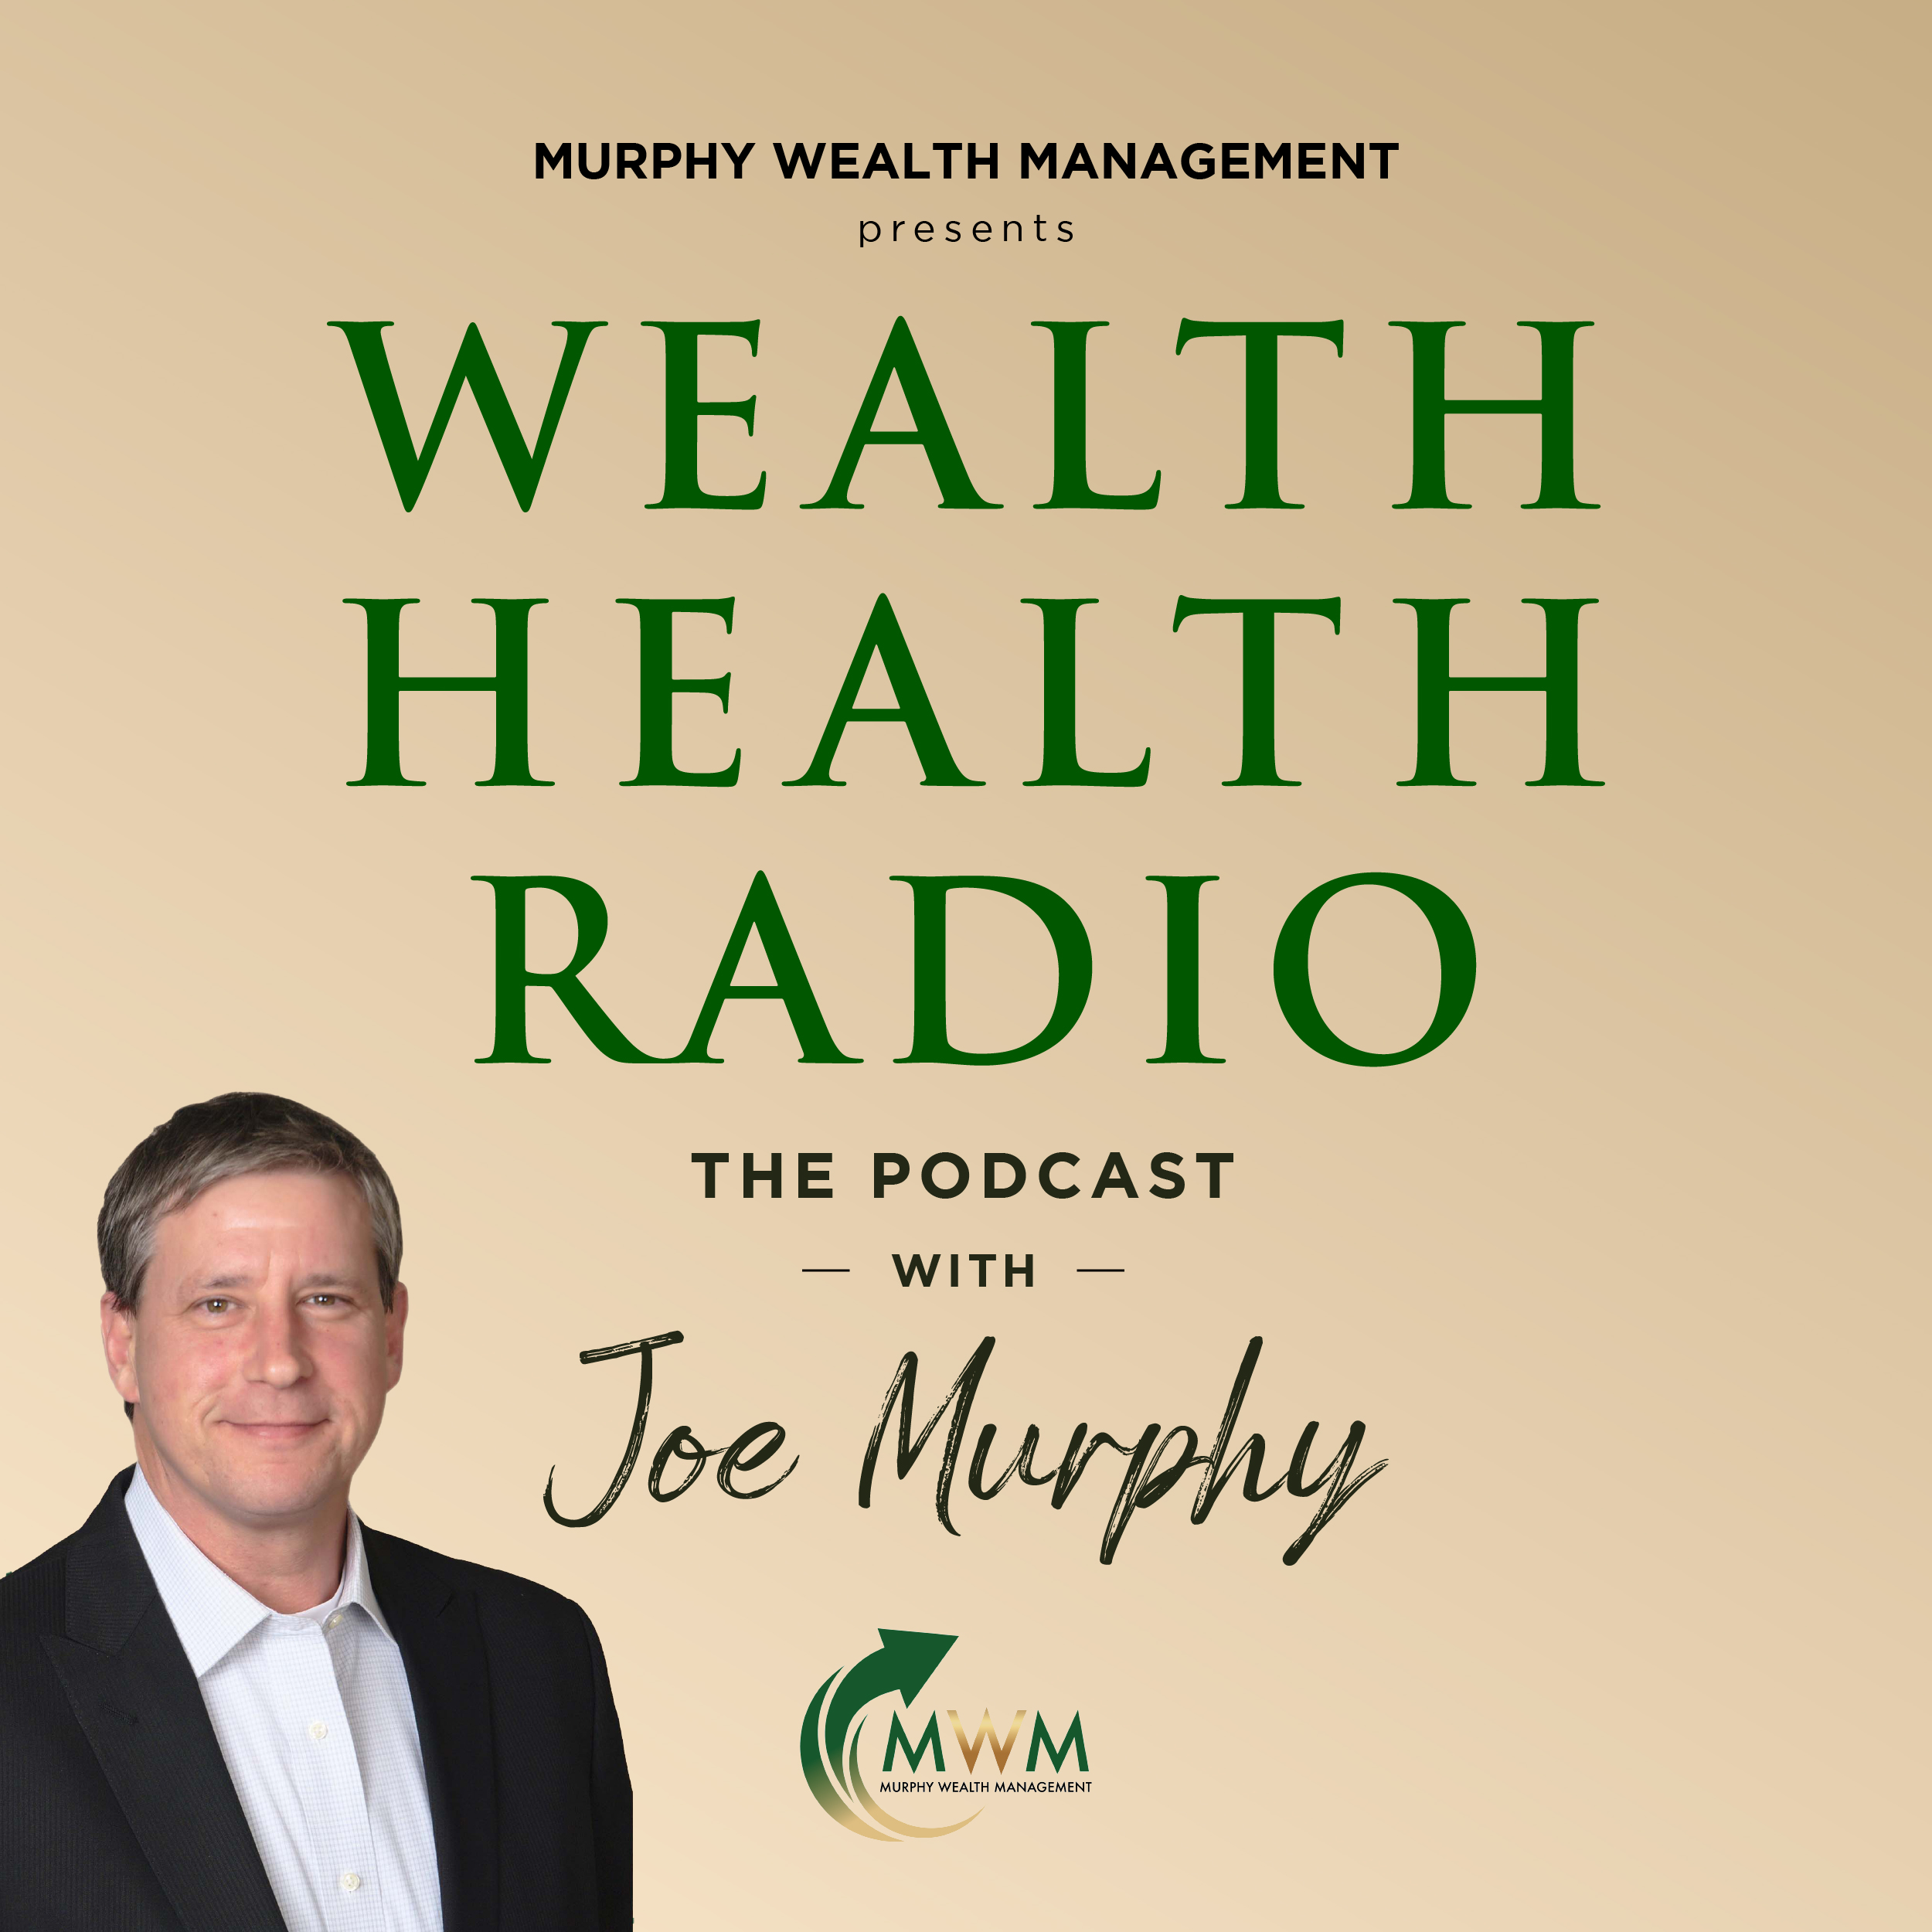 Wealth Health Radio Joe Murphy begins with dispelling the myth that 65 is the magic age to retire. The question is, is it earlier or later than 65. Joe’s got the answer.